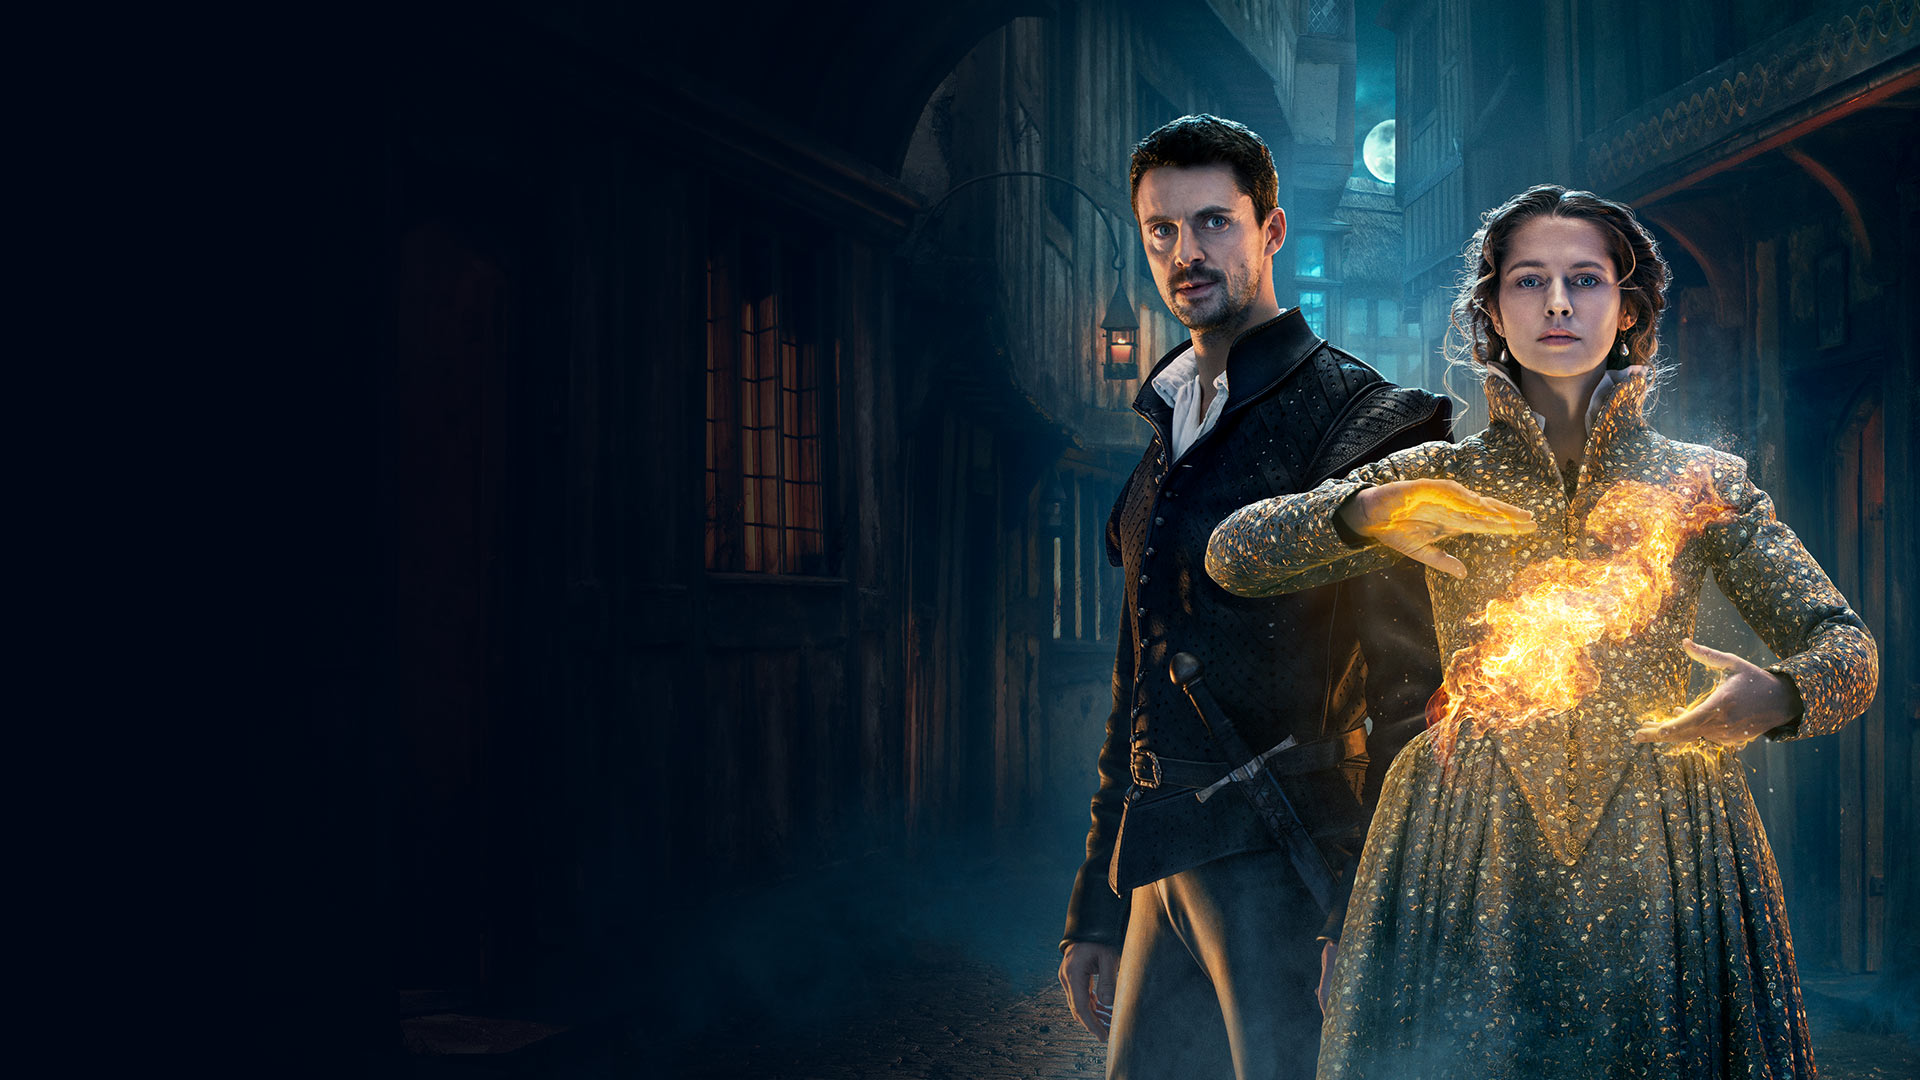 A Discovery of Witches Season 2: Release Date, Trailer and Updates!